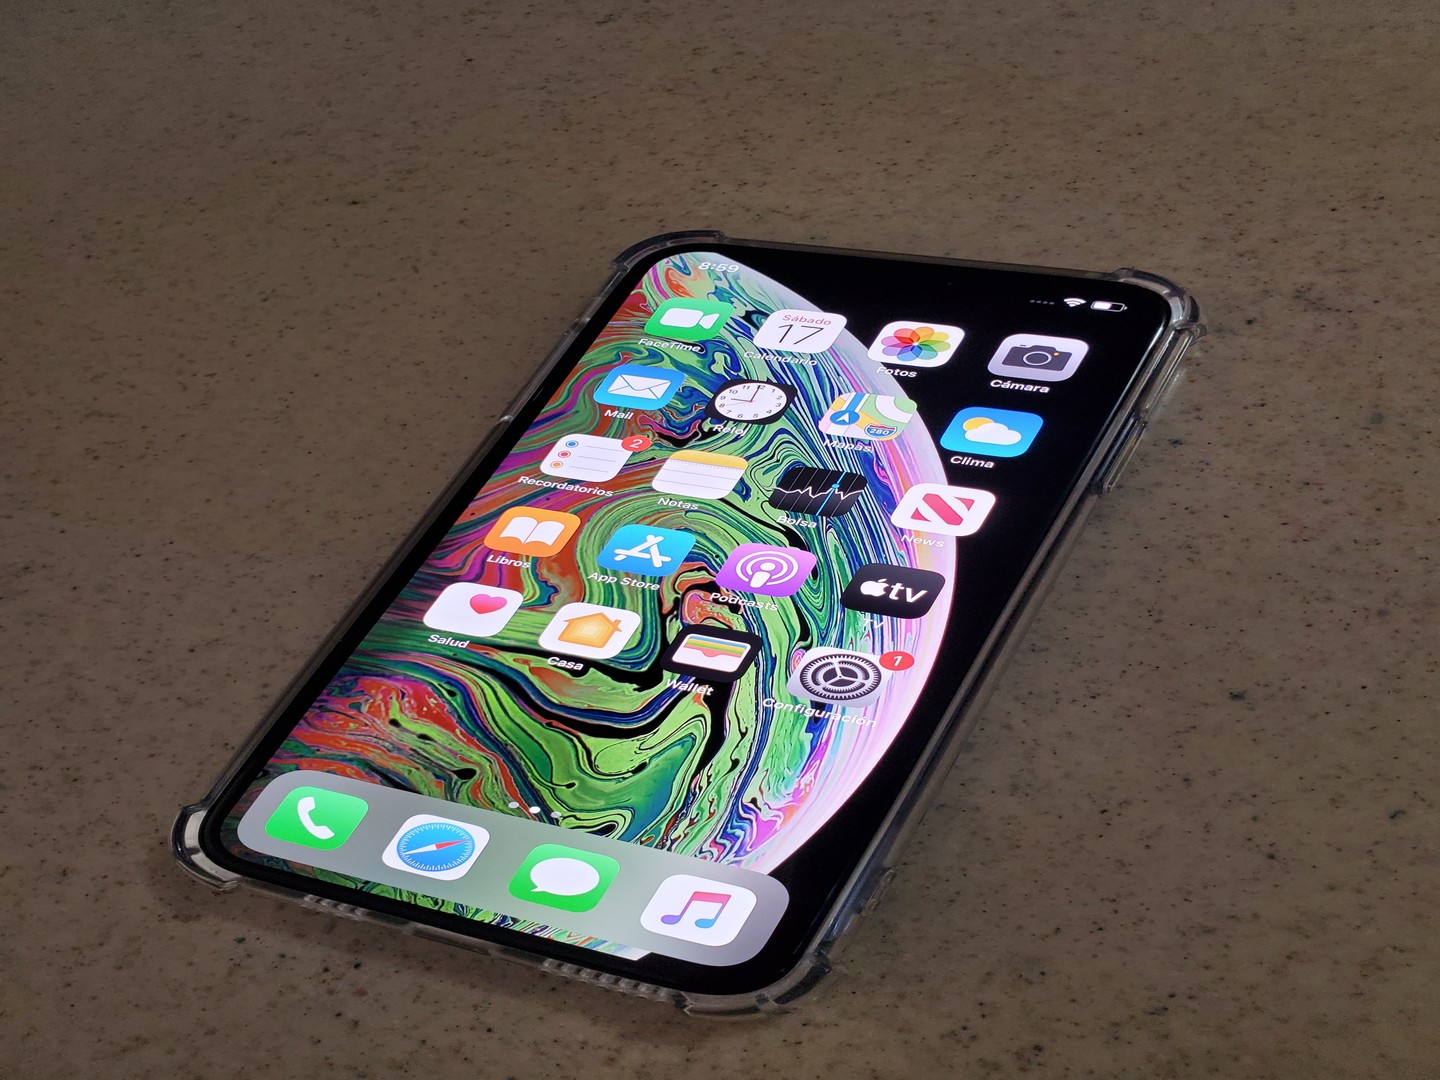 Iphone XS max factory 64GB